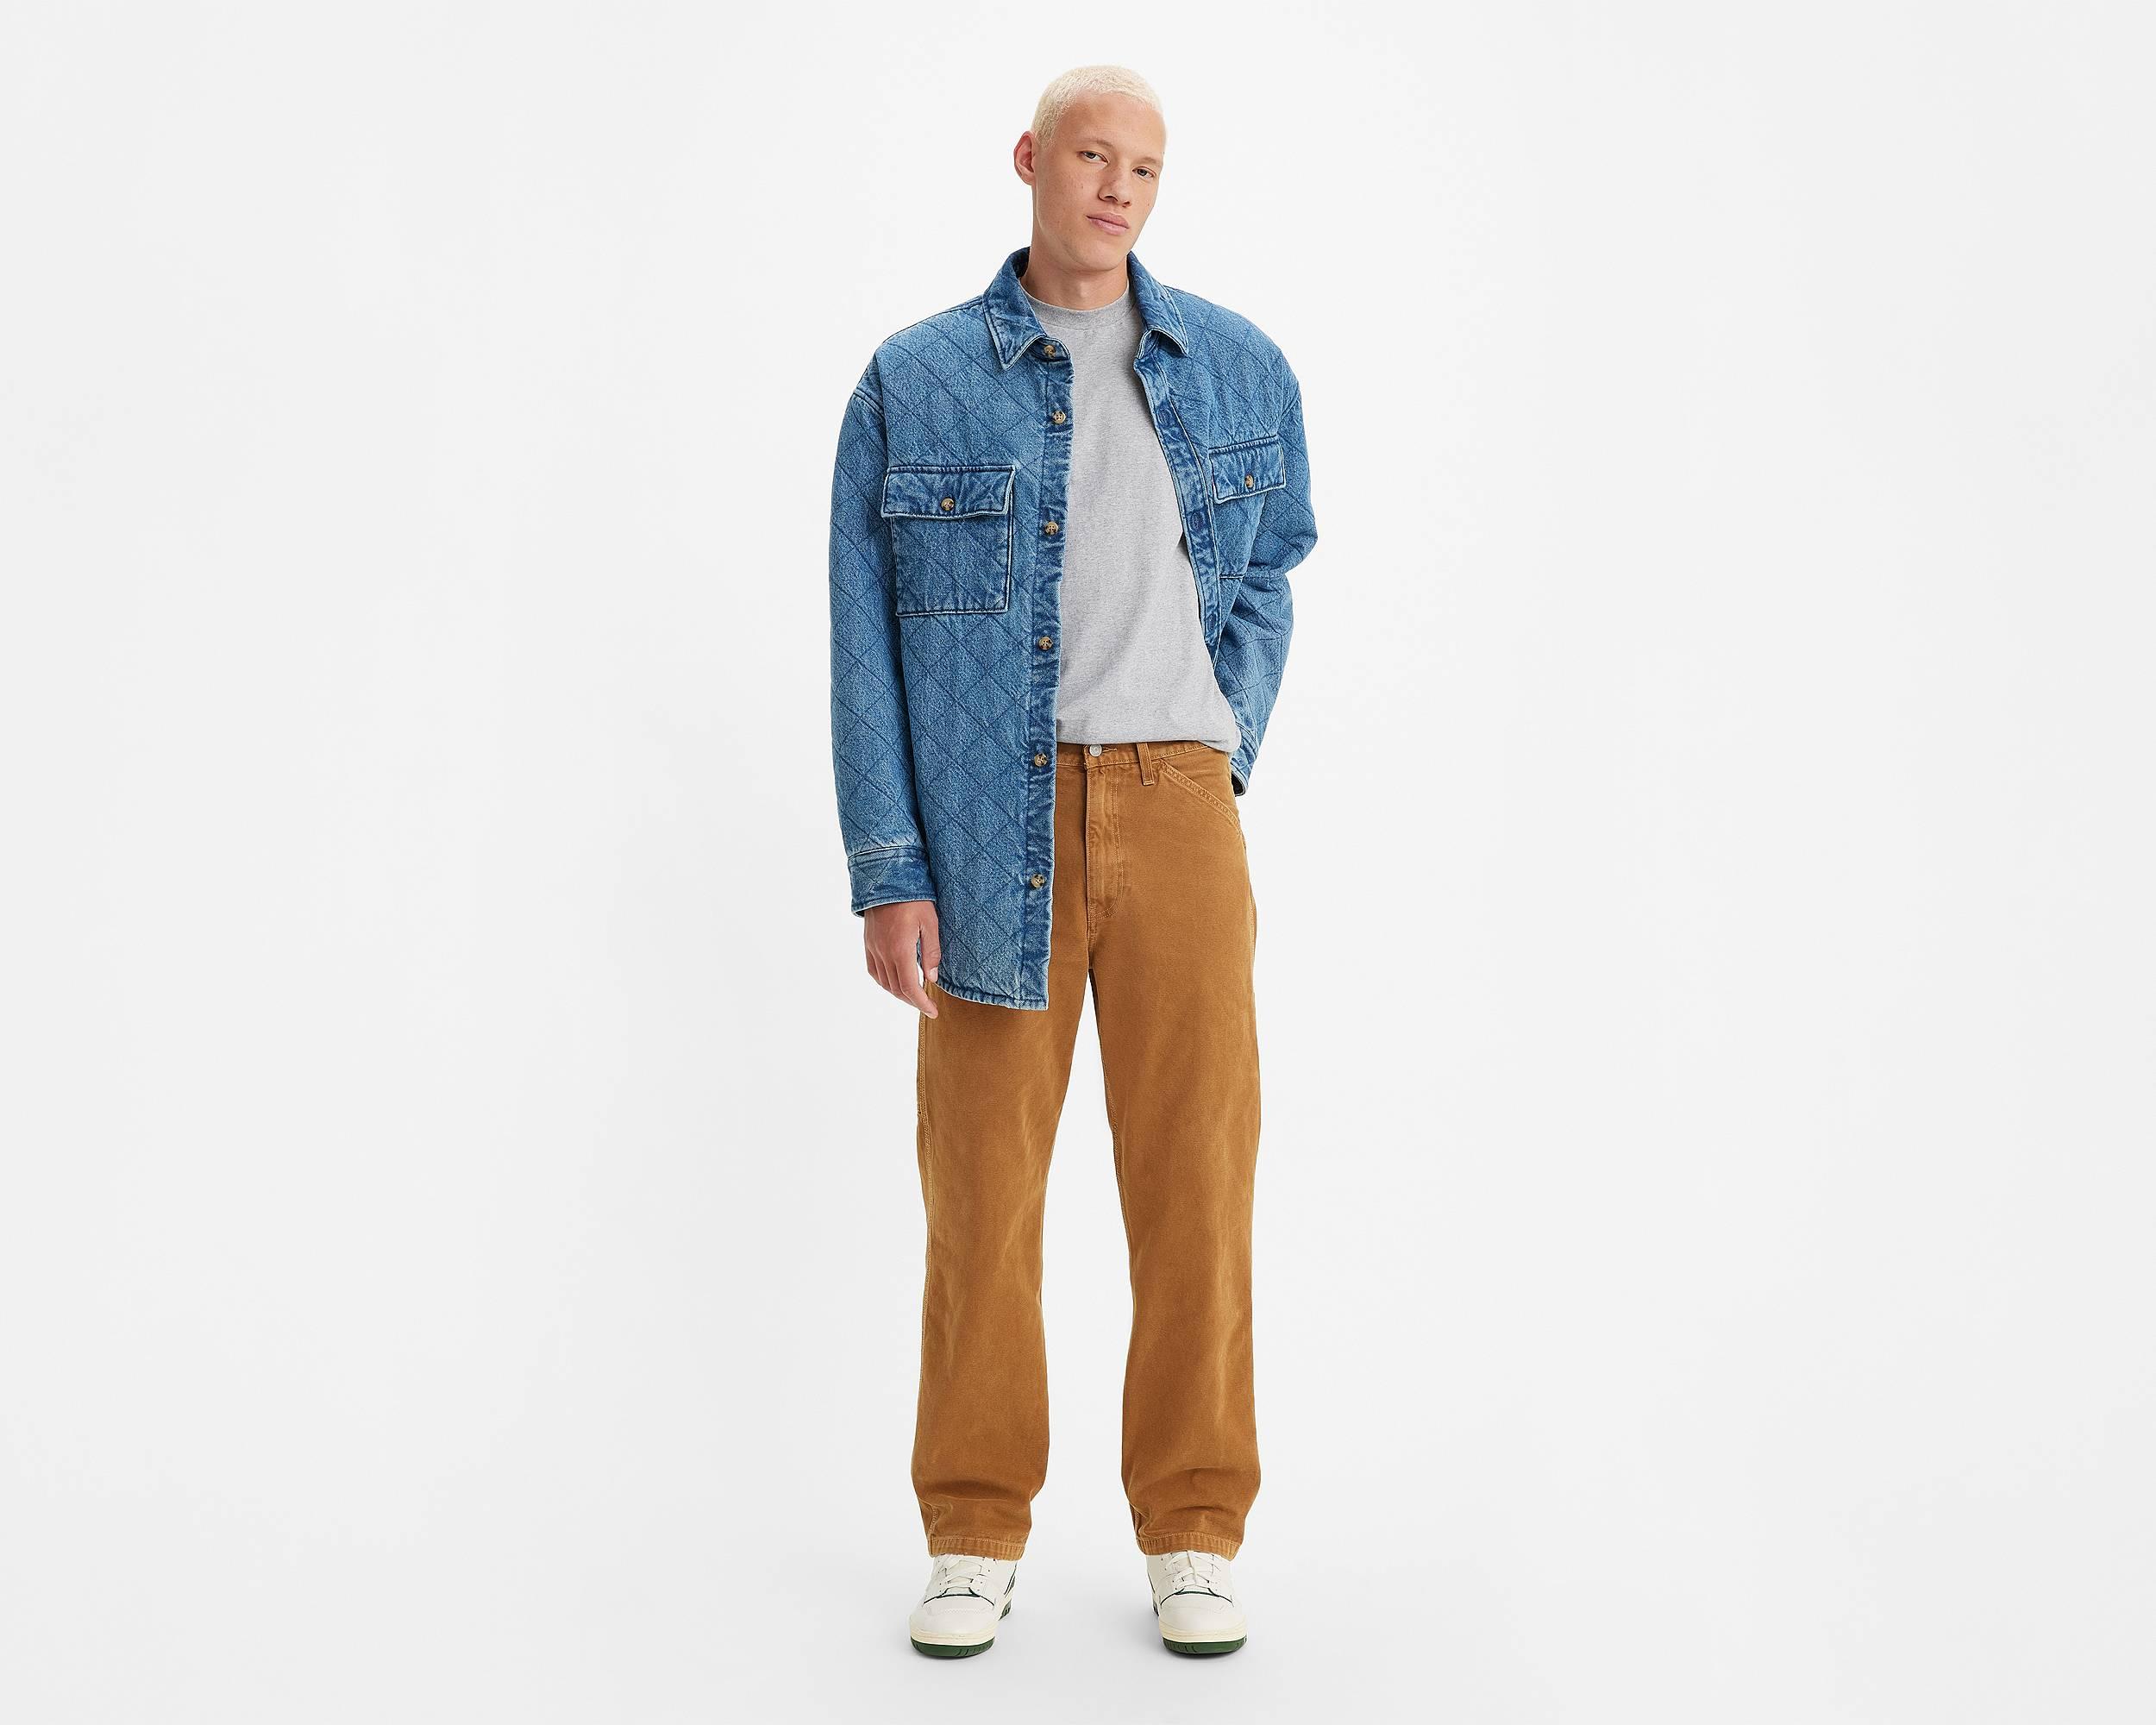 568™ Stay Loose Carpenter Pants - Levi's Jeans, Jackets & Clothing